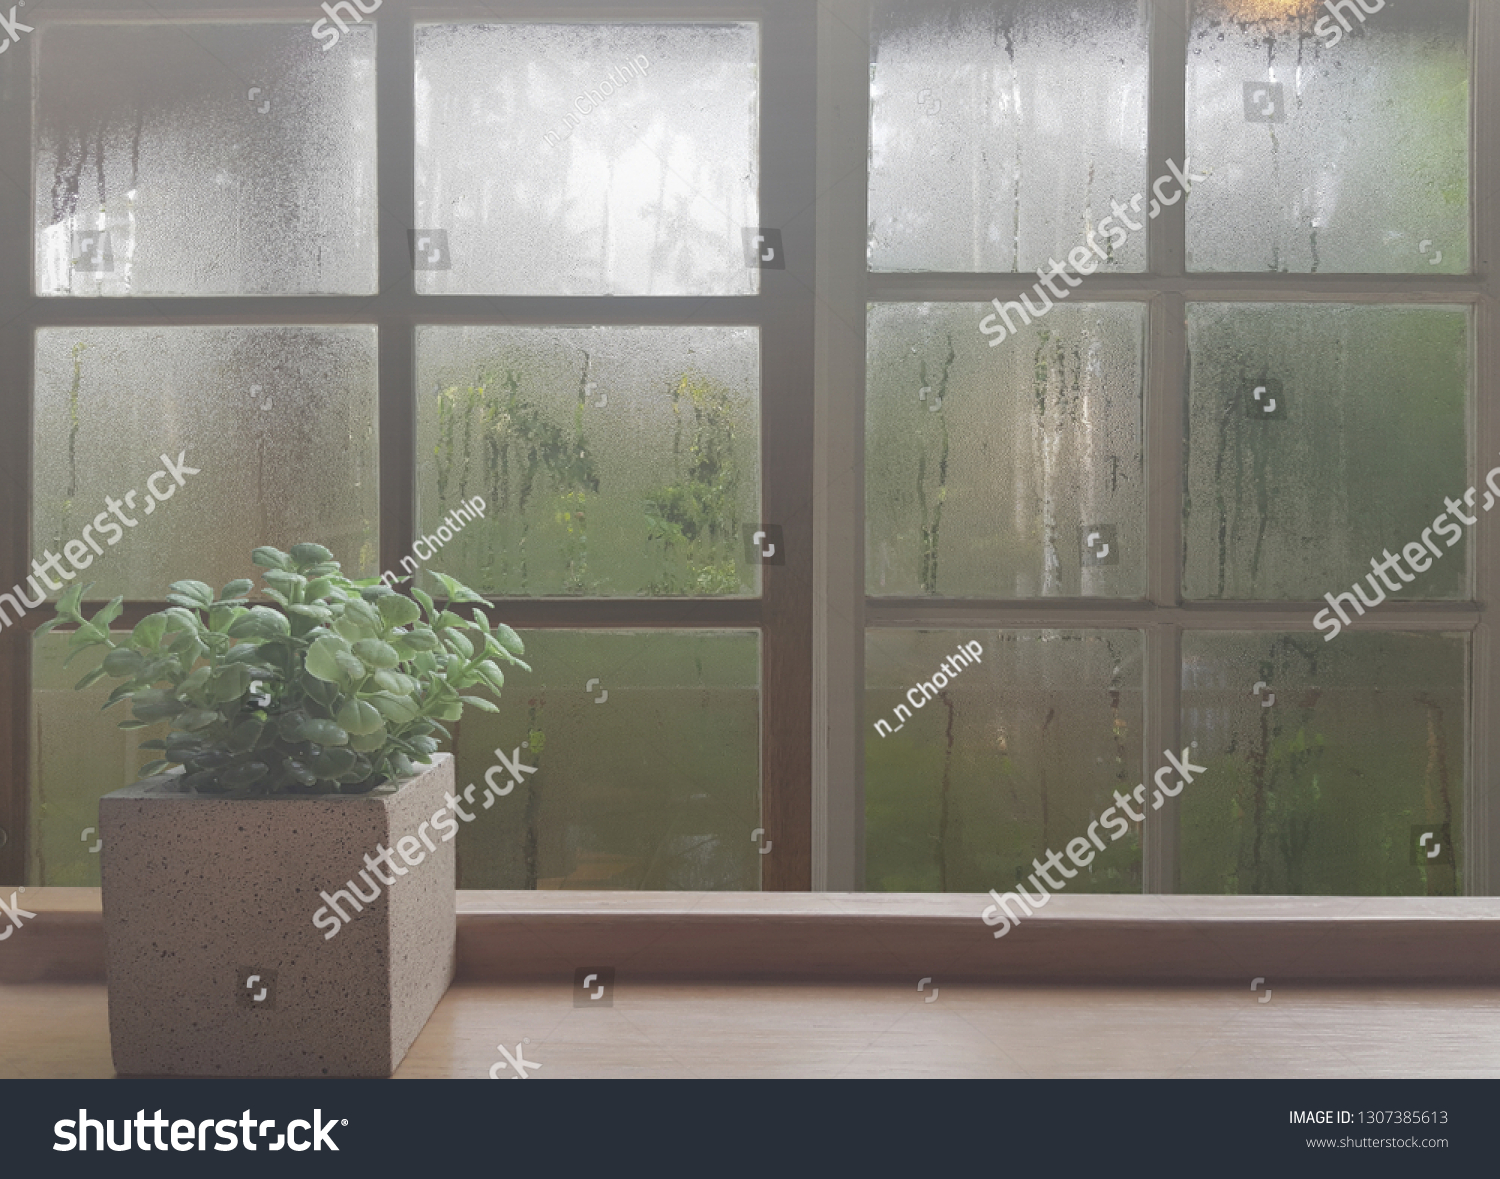 On a rainy day, see the water drops on the outside mirror blurred. (a rainy day window background)
Place the flowerpot on the wooden floor on the left.
Feelings, sadness, loneliness, nostalgia. #1307385613